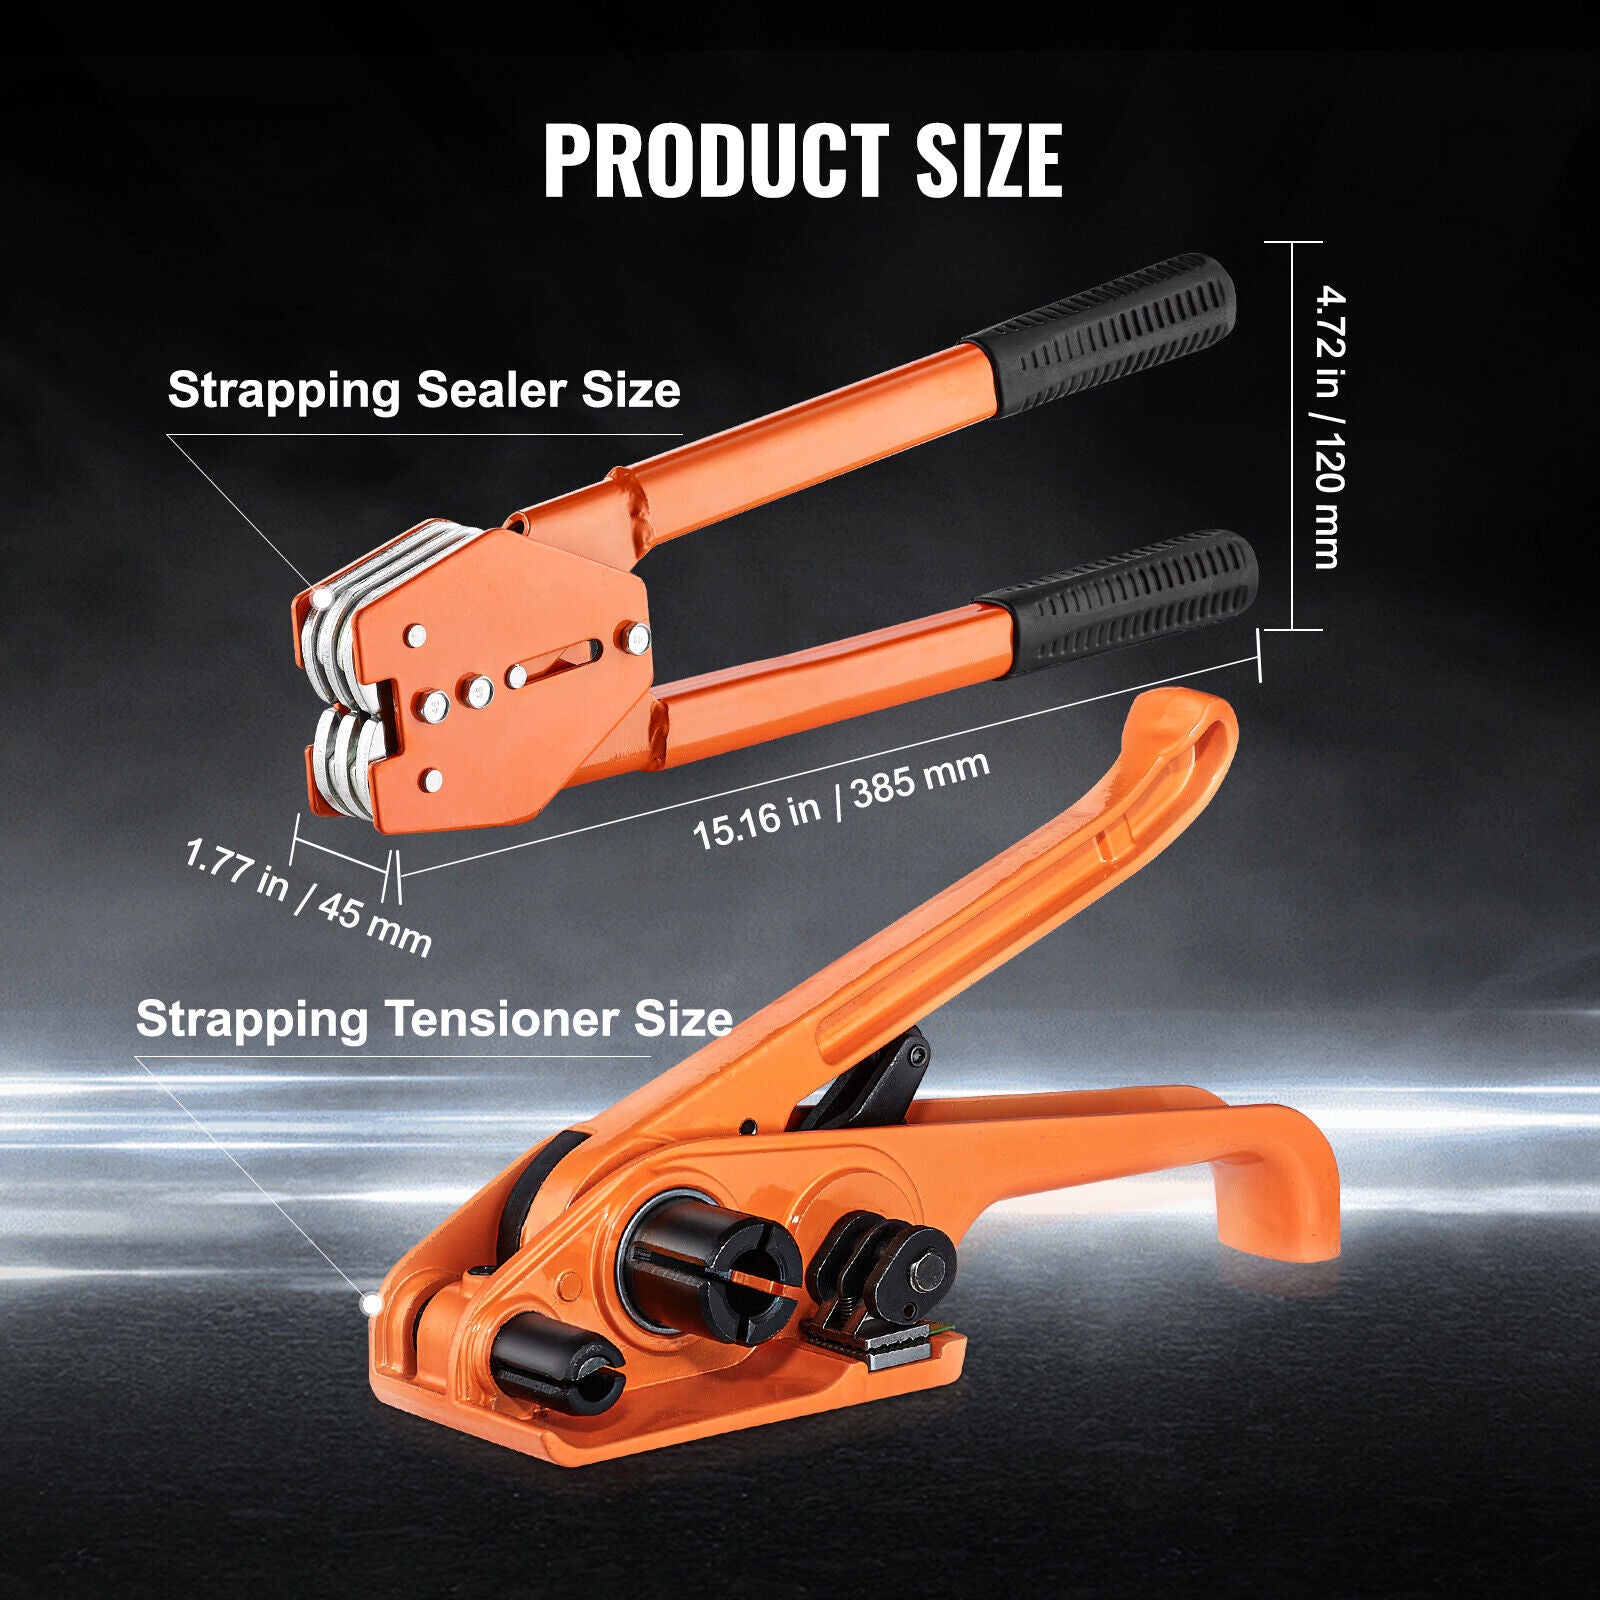 Heavy Duty Packaging Banding Strapping Kit Set Tensioning Tool Tensioner With Sealer 300M